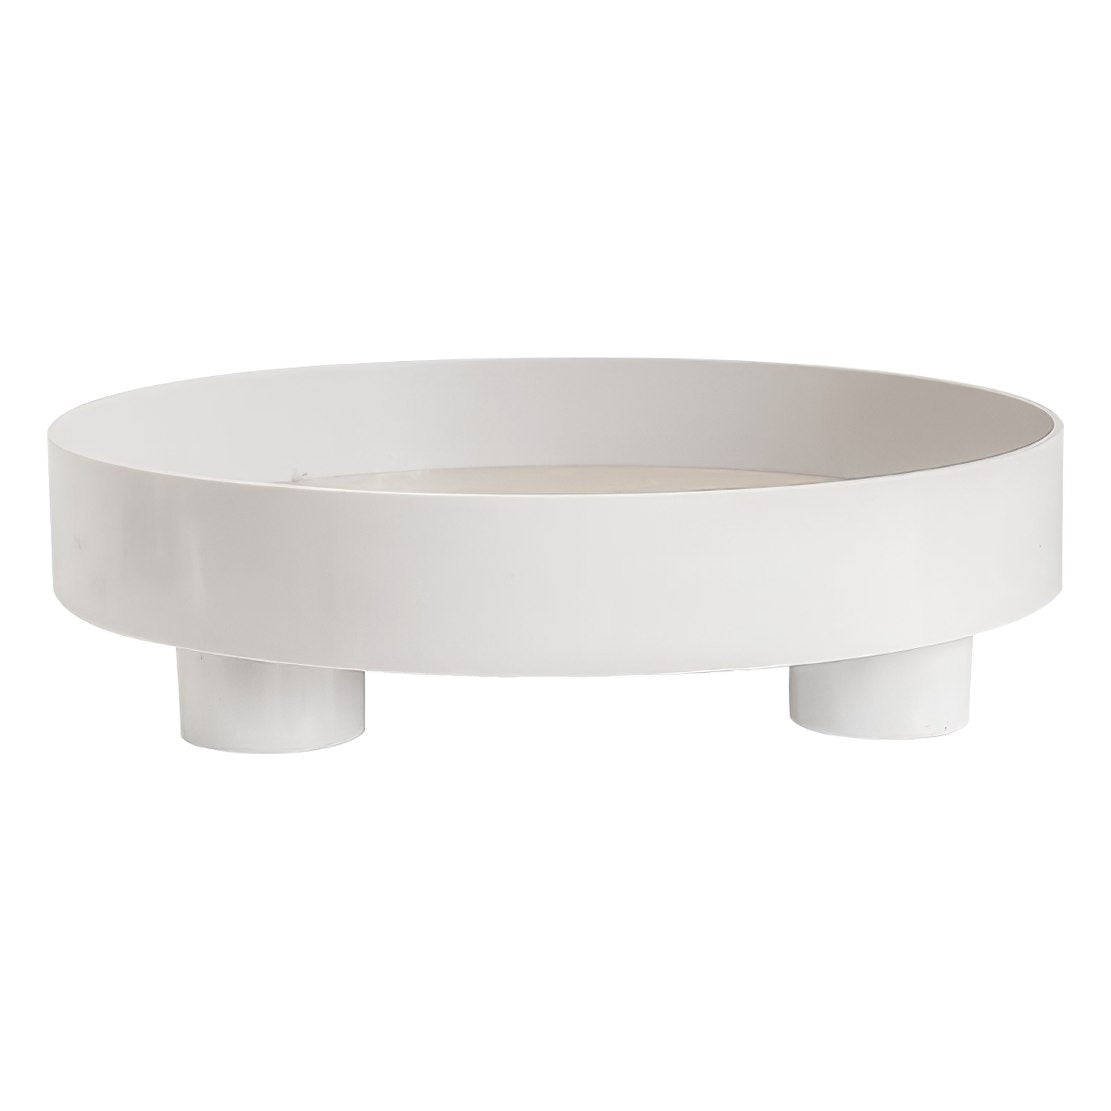 White, circle, elevated tray